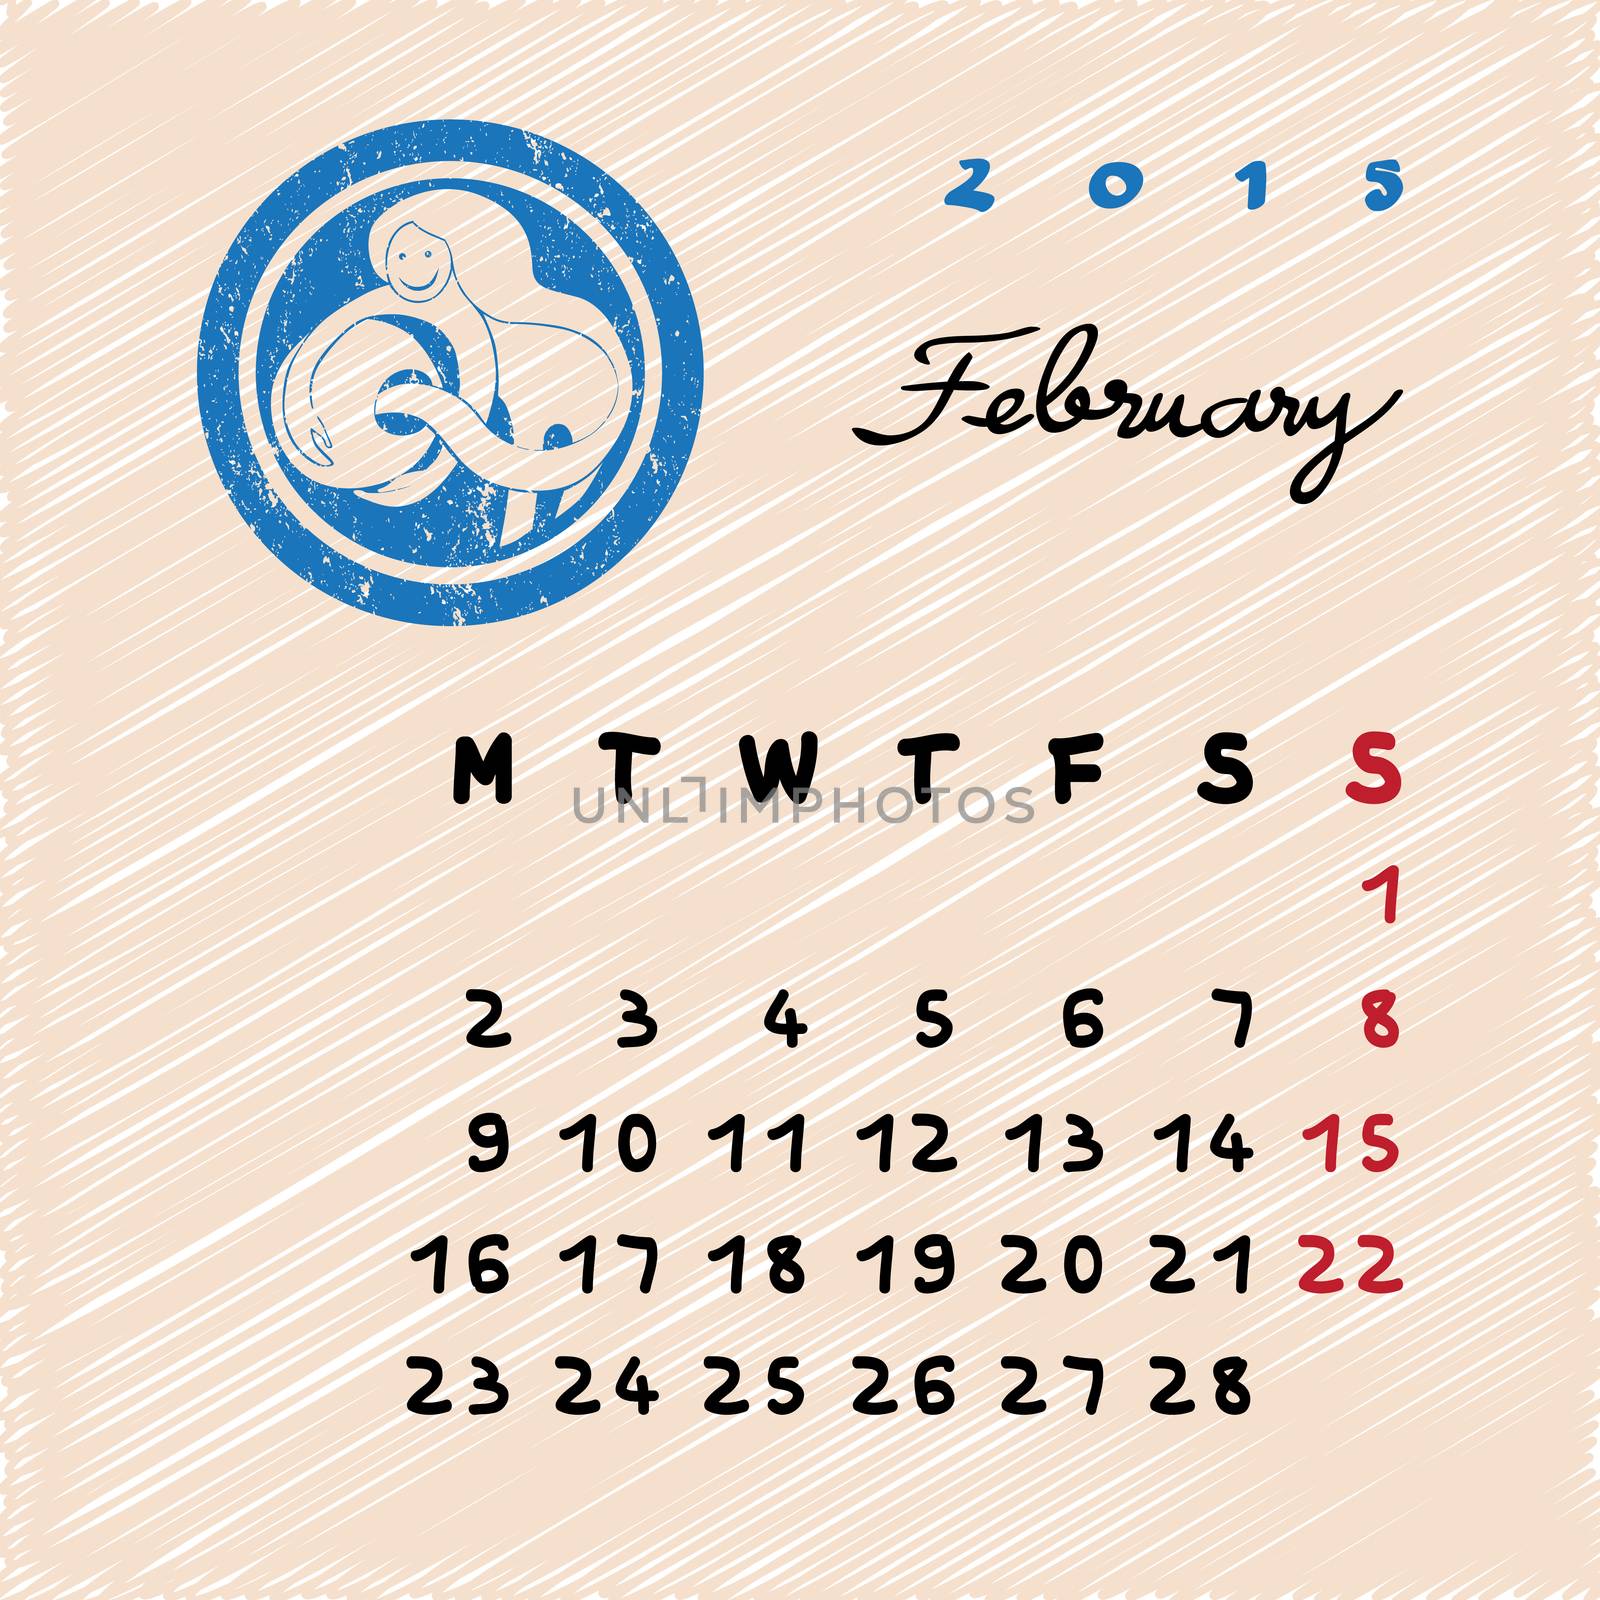 Calendar 2015 page illustration with zodiac sign of Aquarius as grungy stamp over a colored scribble background, February